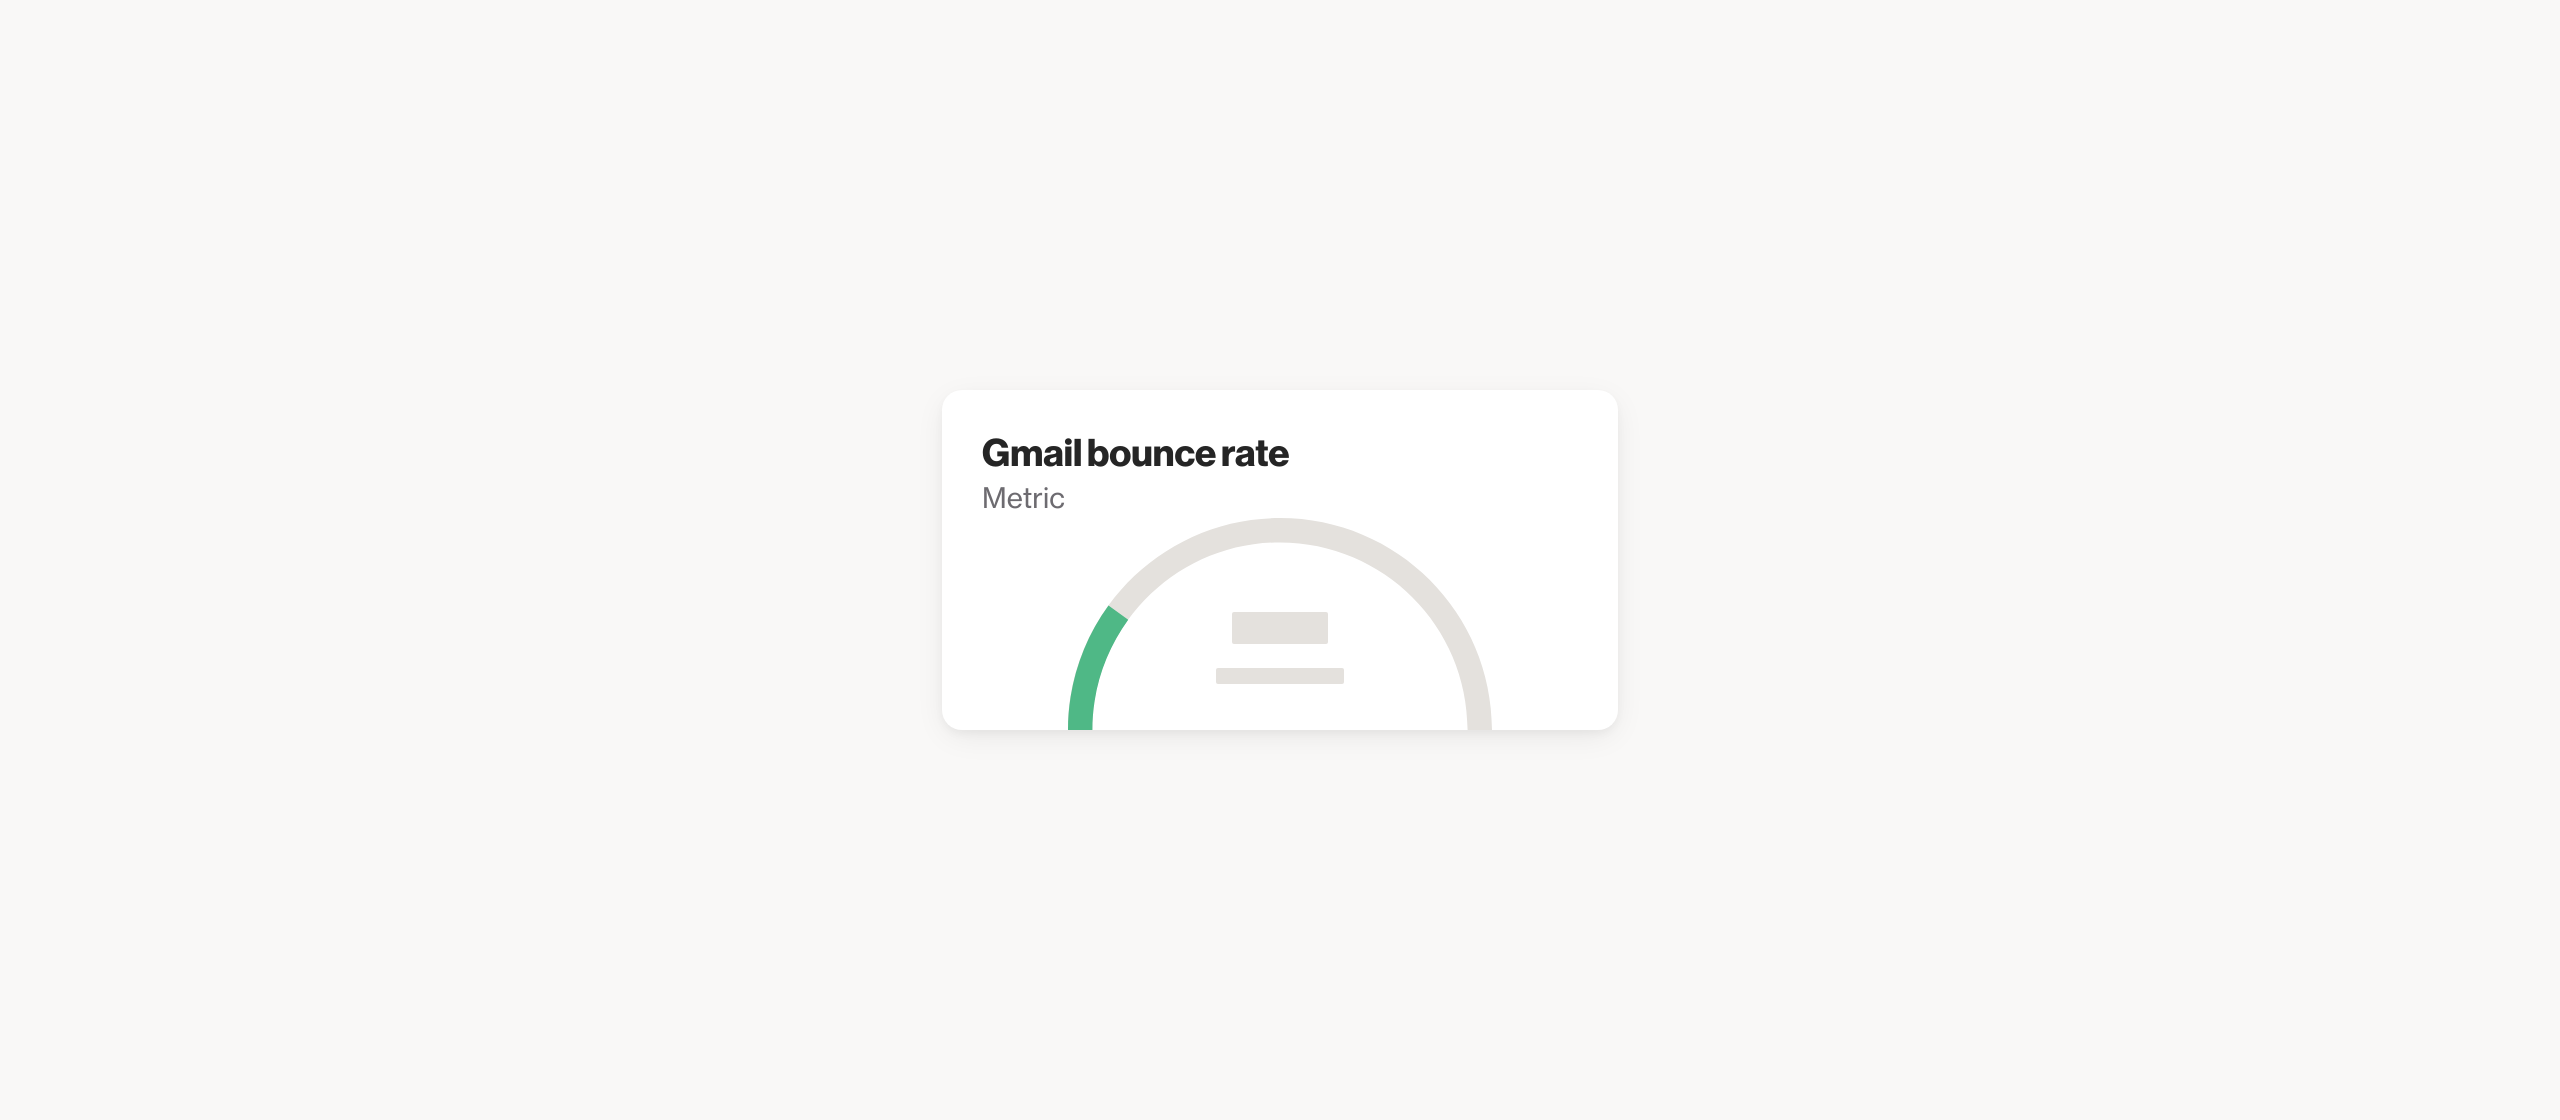 Gmail bounce rate